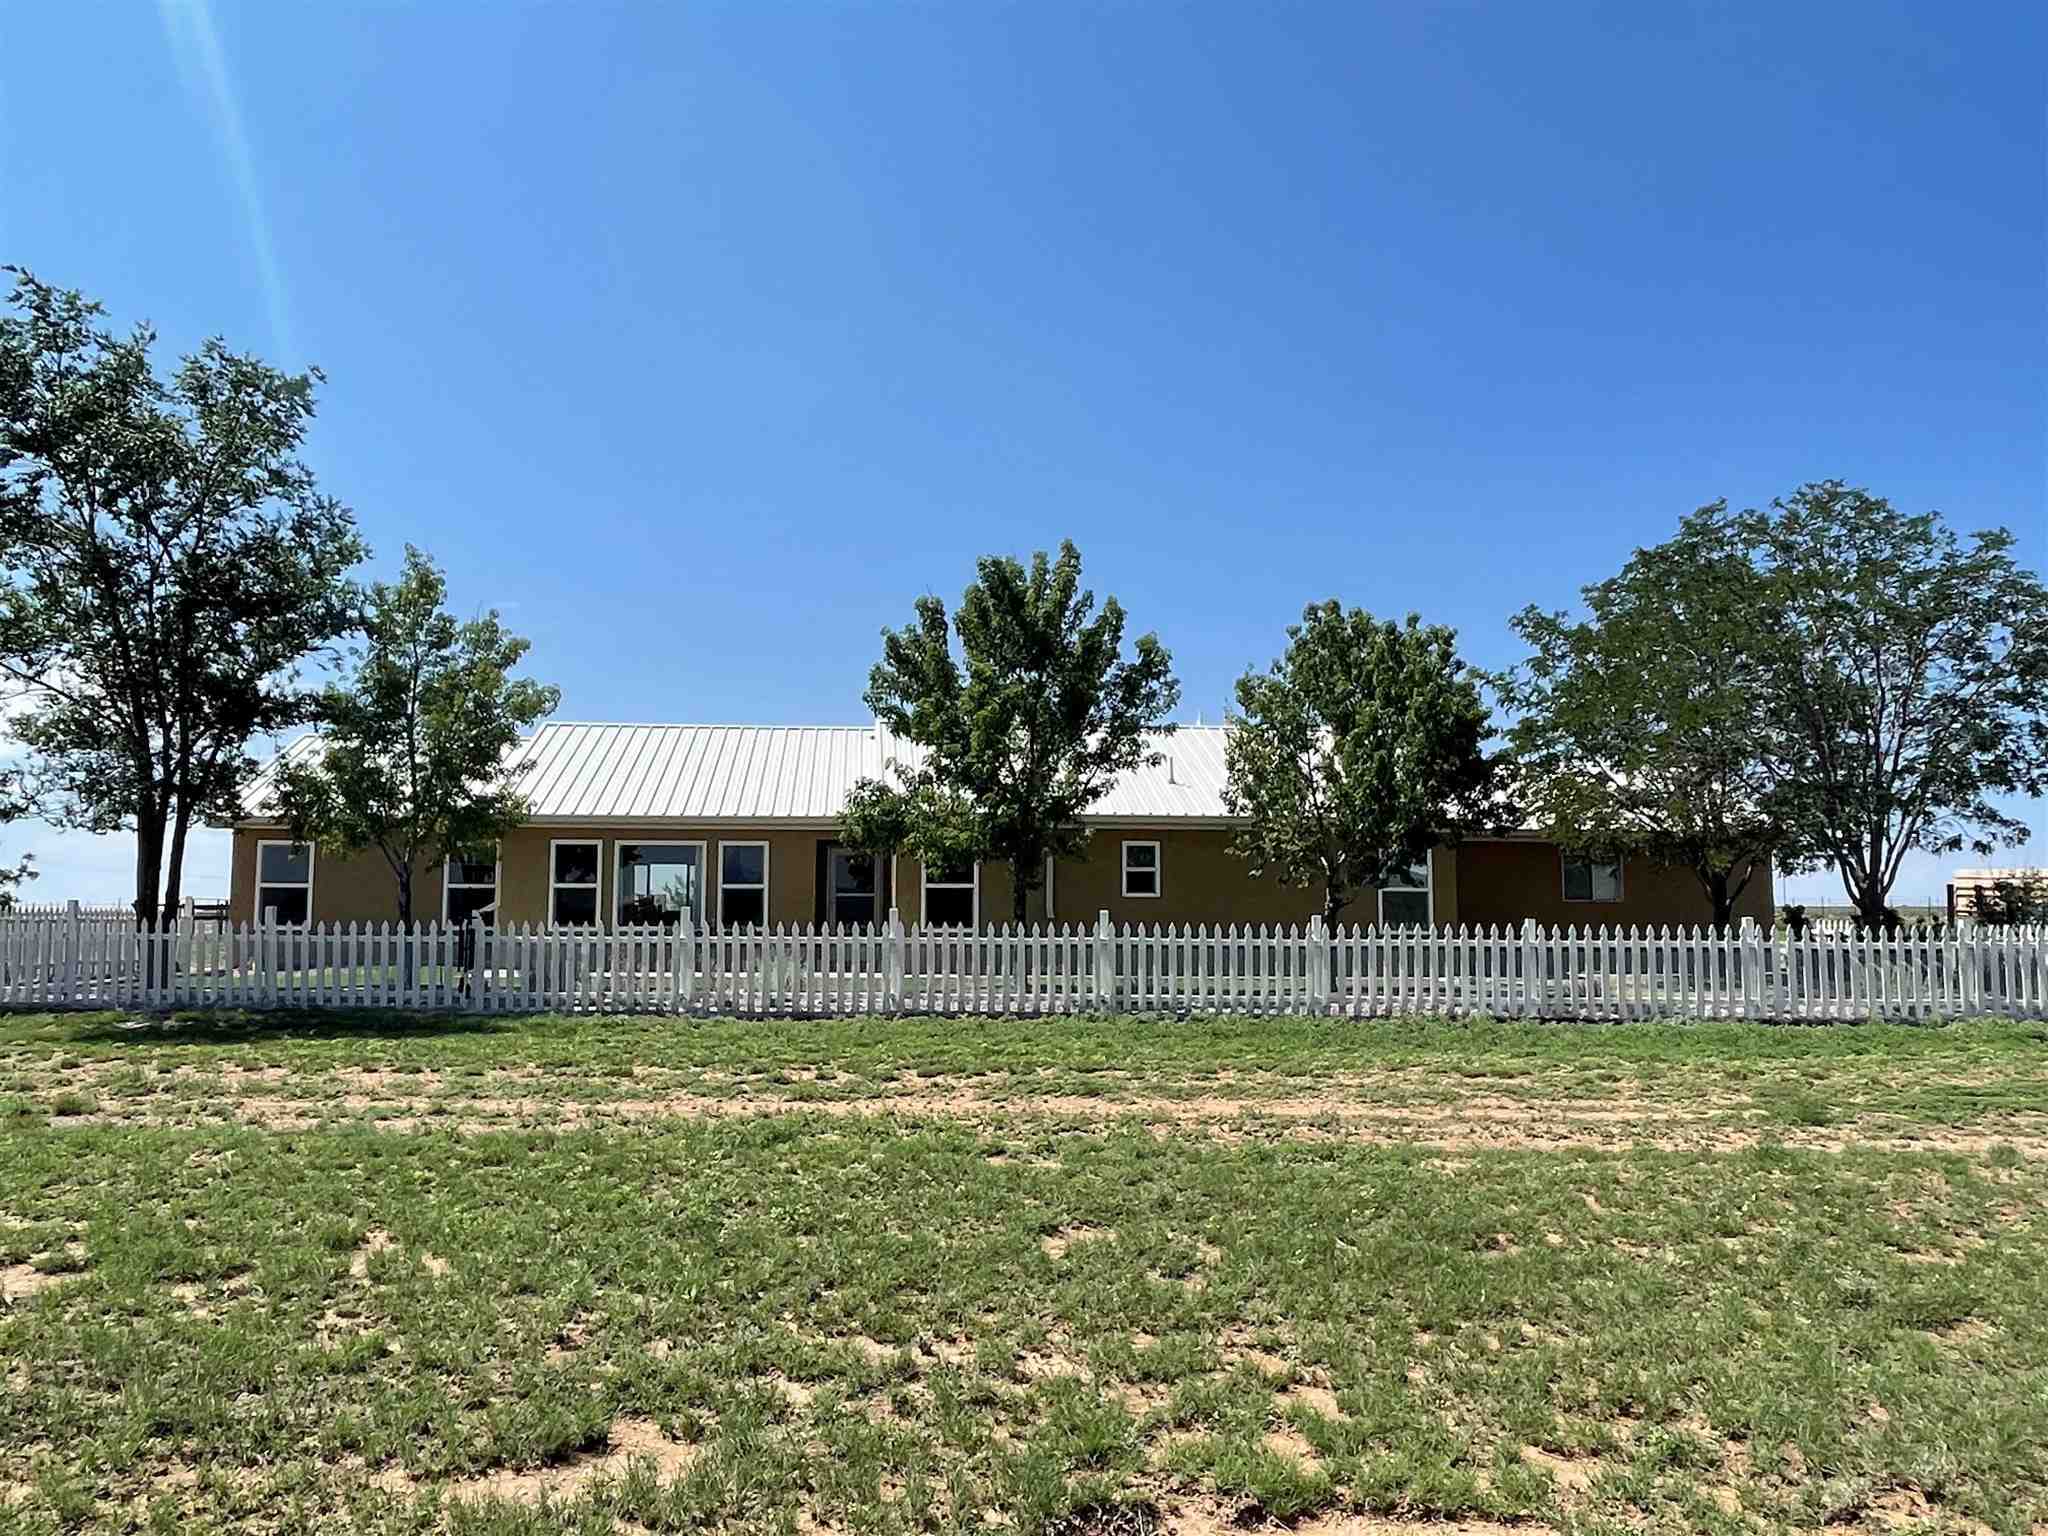 18 Caballo, Stanley, New Mexico 87056, 4 Bedrooms Bedrooms, ,2 BathroomsBathrooms,Residential,For Sale,18 Caballo,202103200